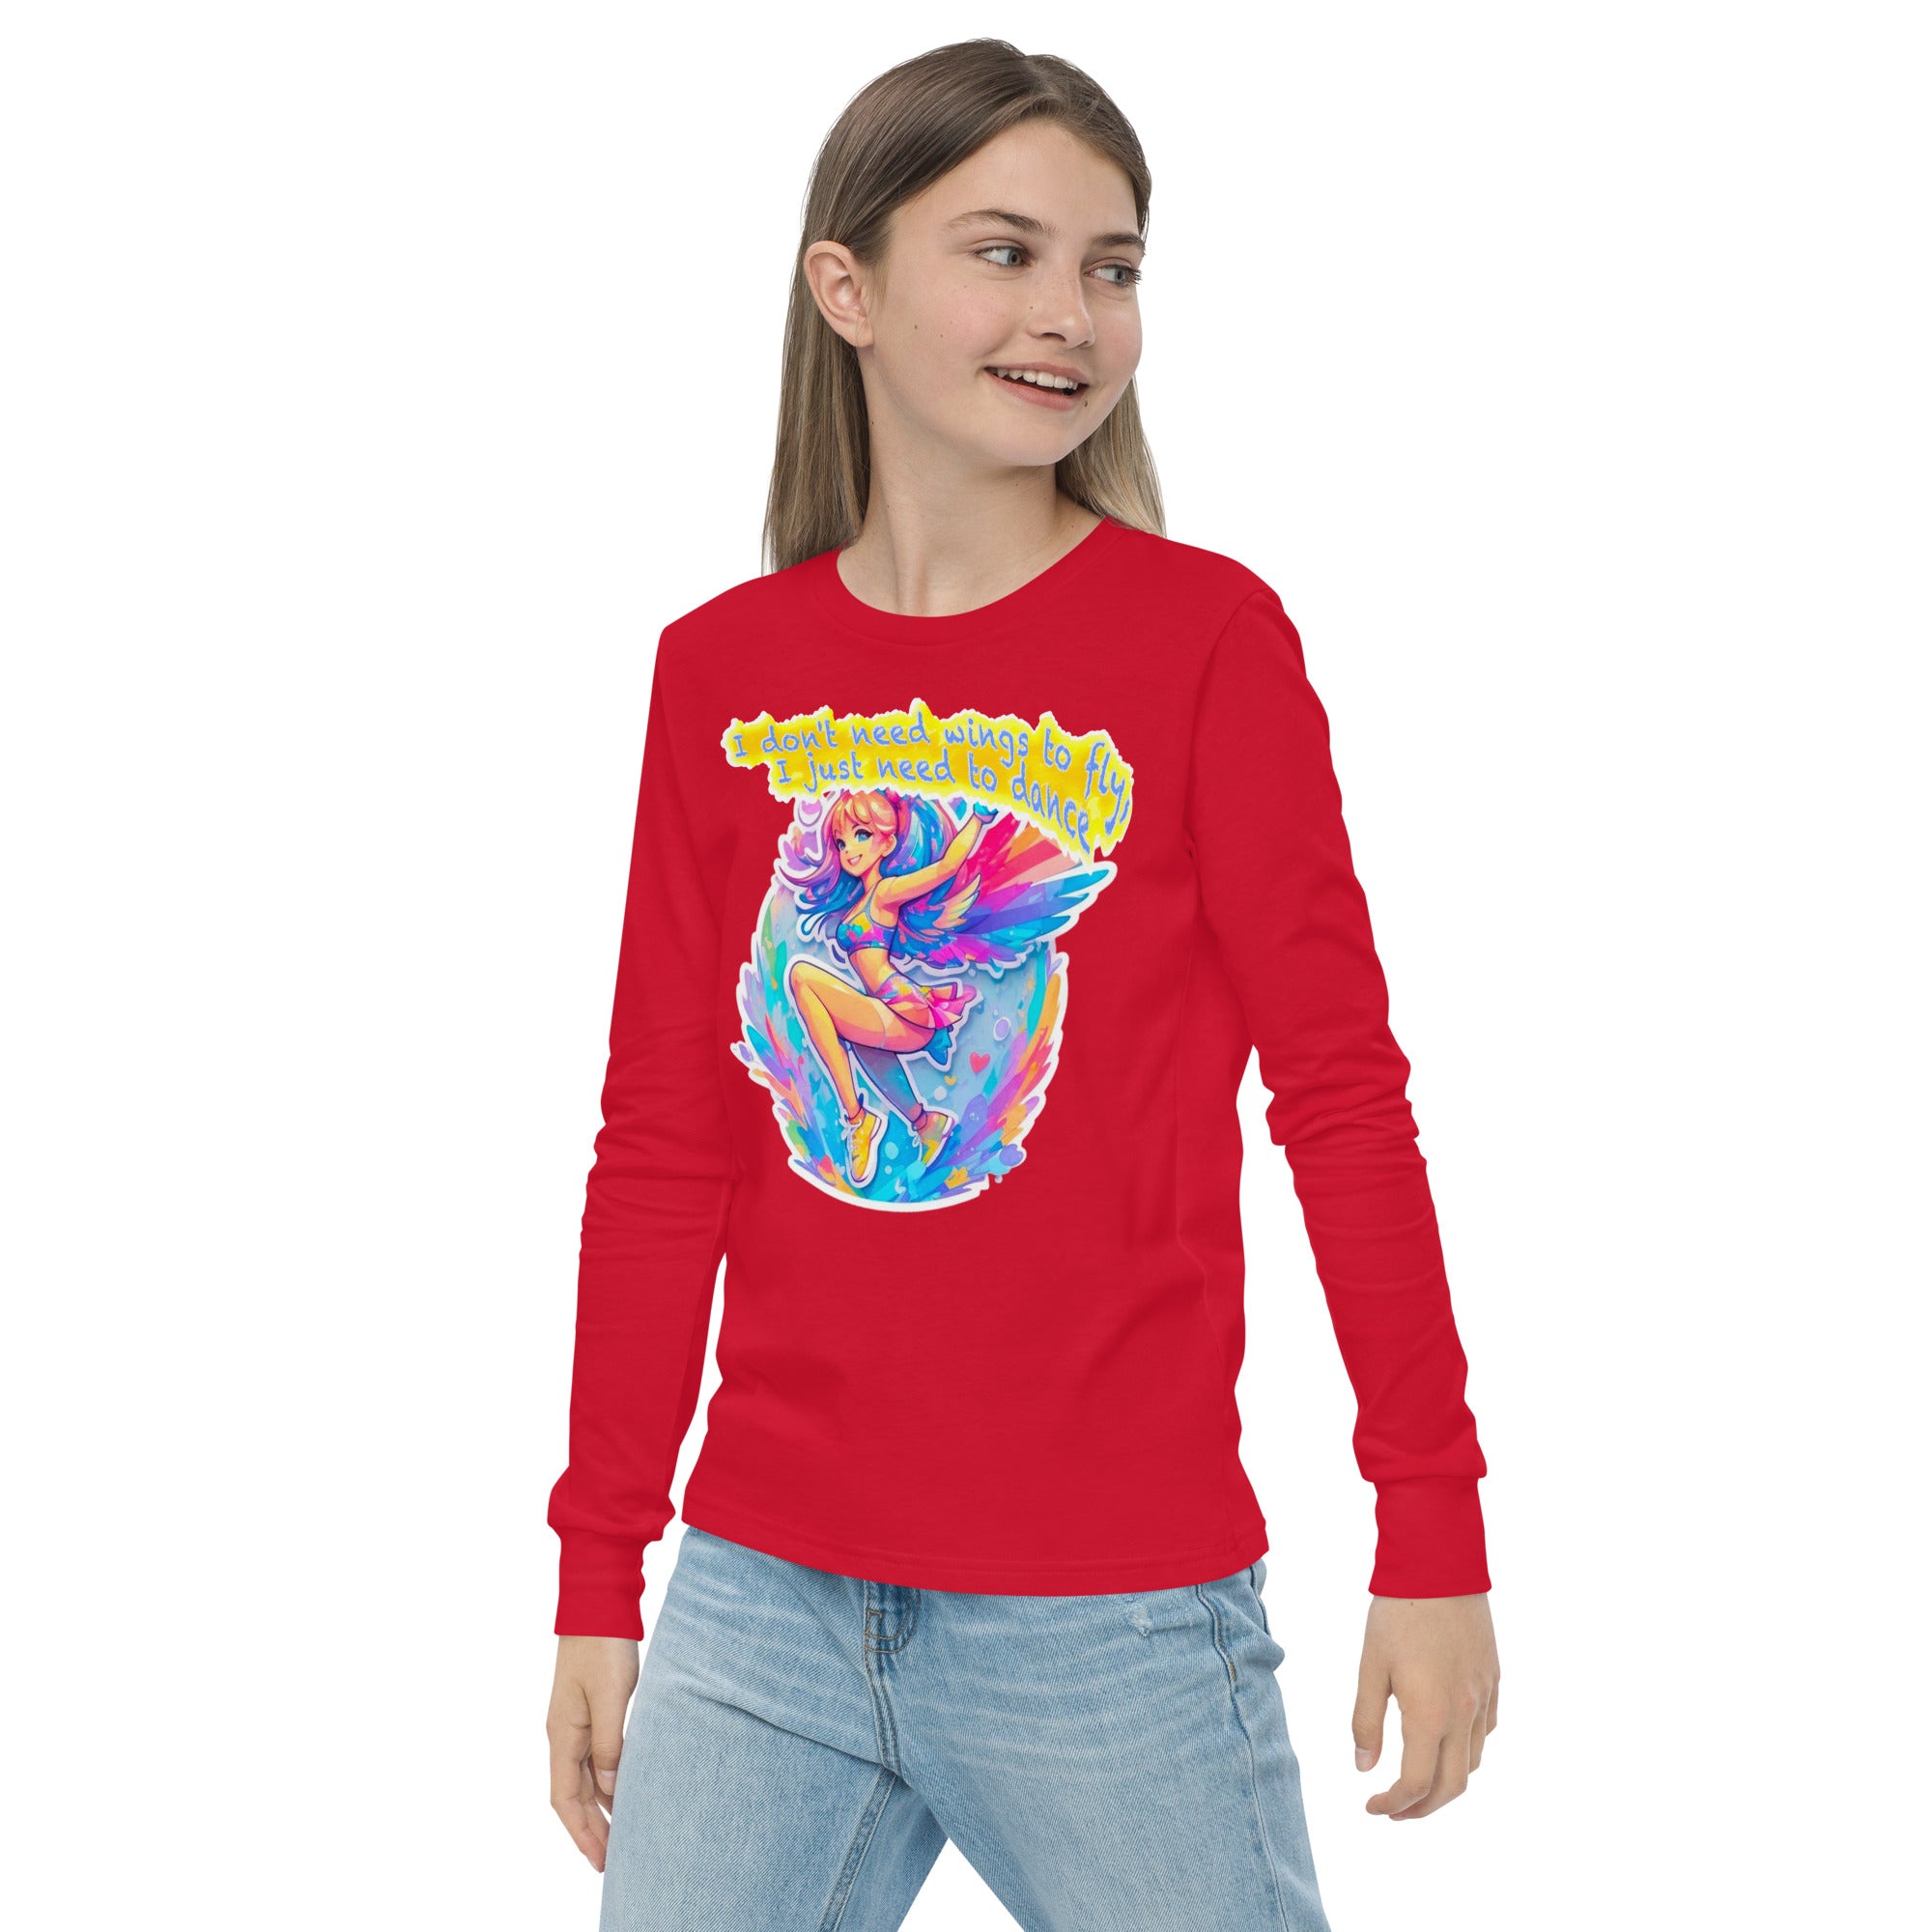 I Don’t Need Wings to Fly, I Just Need to Dance - Youth long sleeve tee